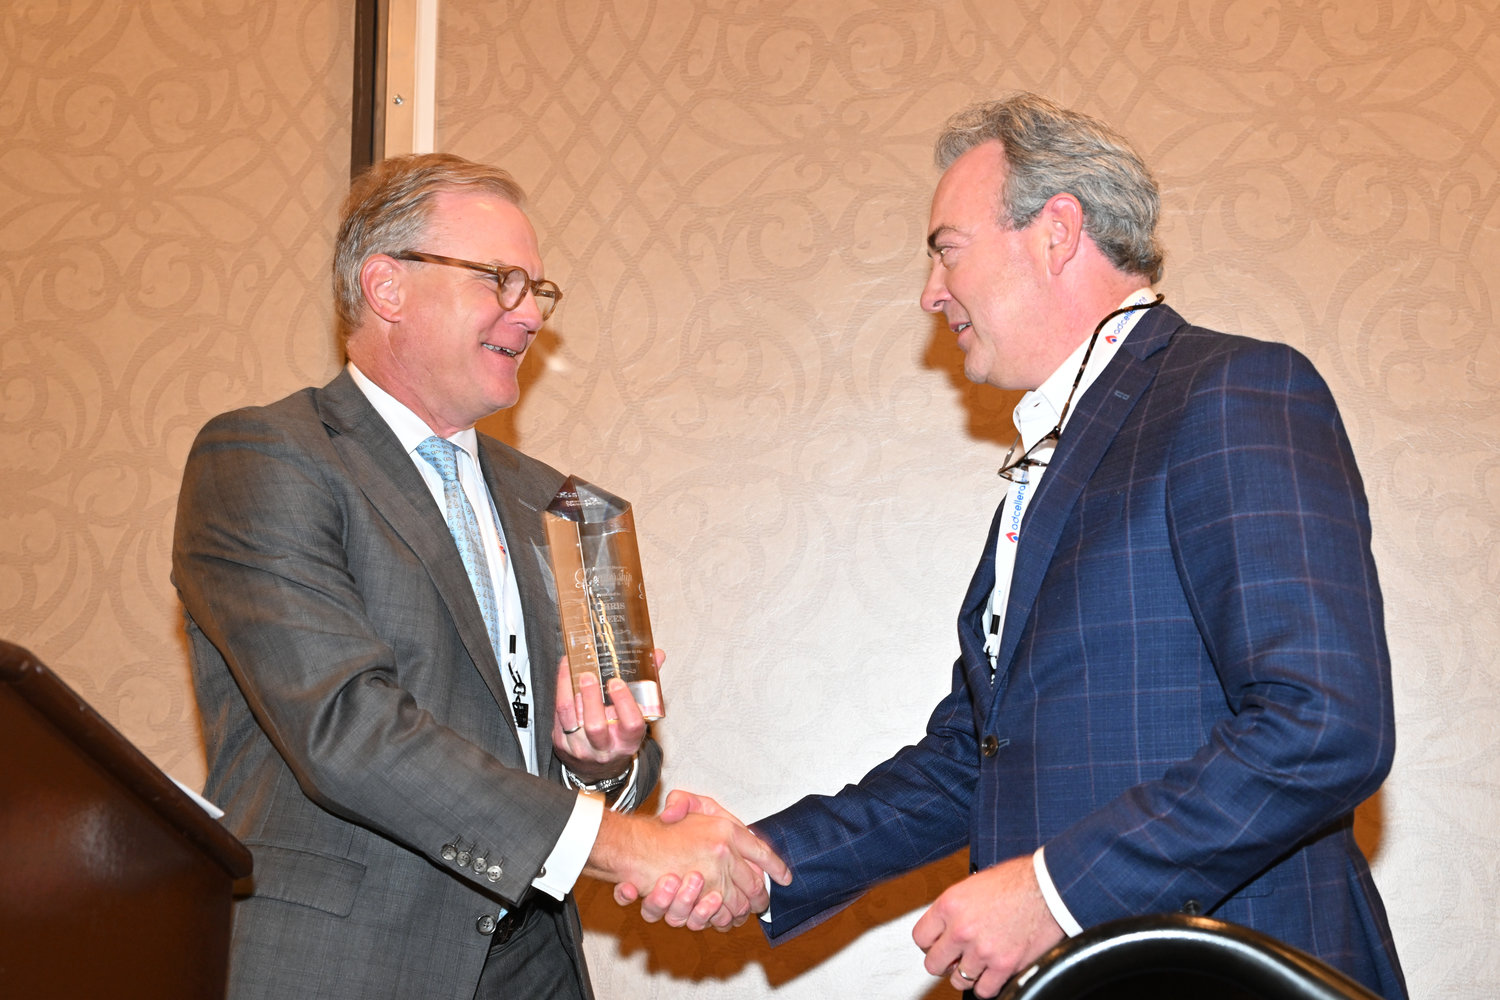 In presenting the Frank W. Mayborn Leadership Award to Chris Reen, president and CEO of Clarity Media Group, America's Newspapers President Nat Lea said Reen was "exactly the right person to steer this association through its first year as president." (Photo by Jeff Strout)